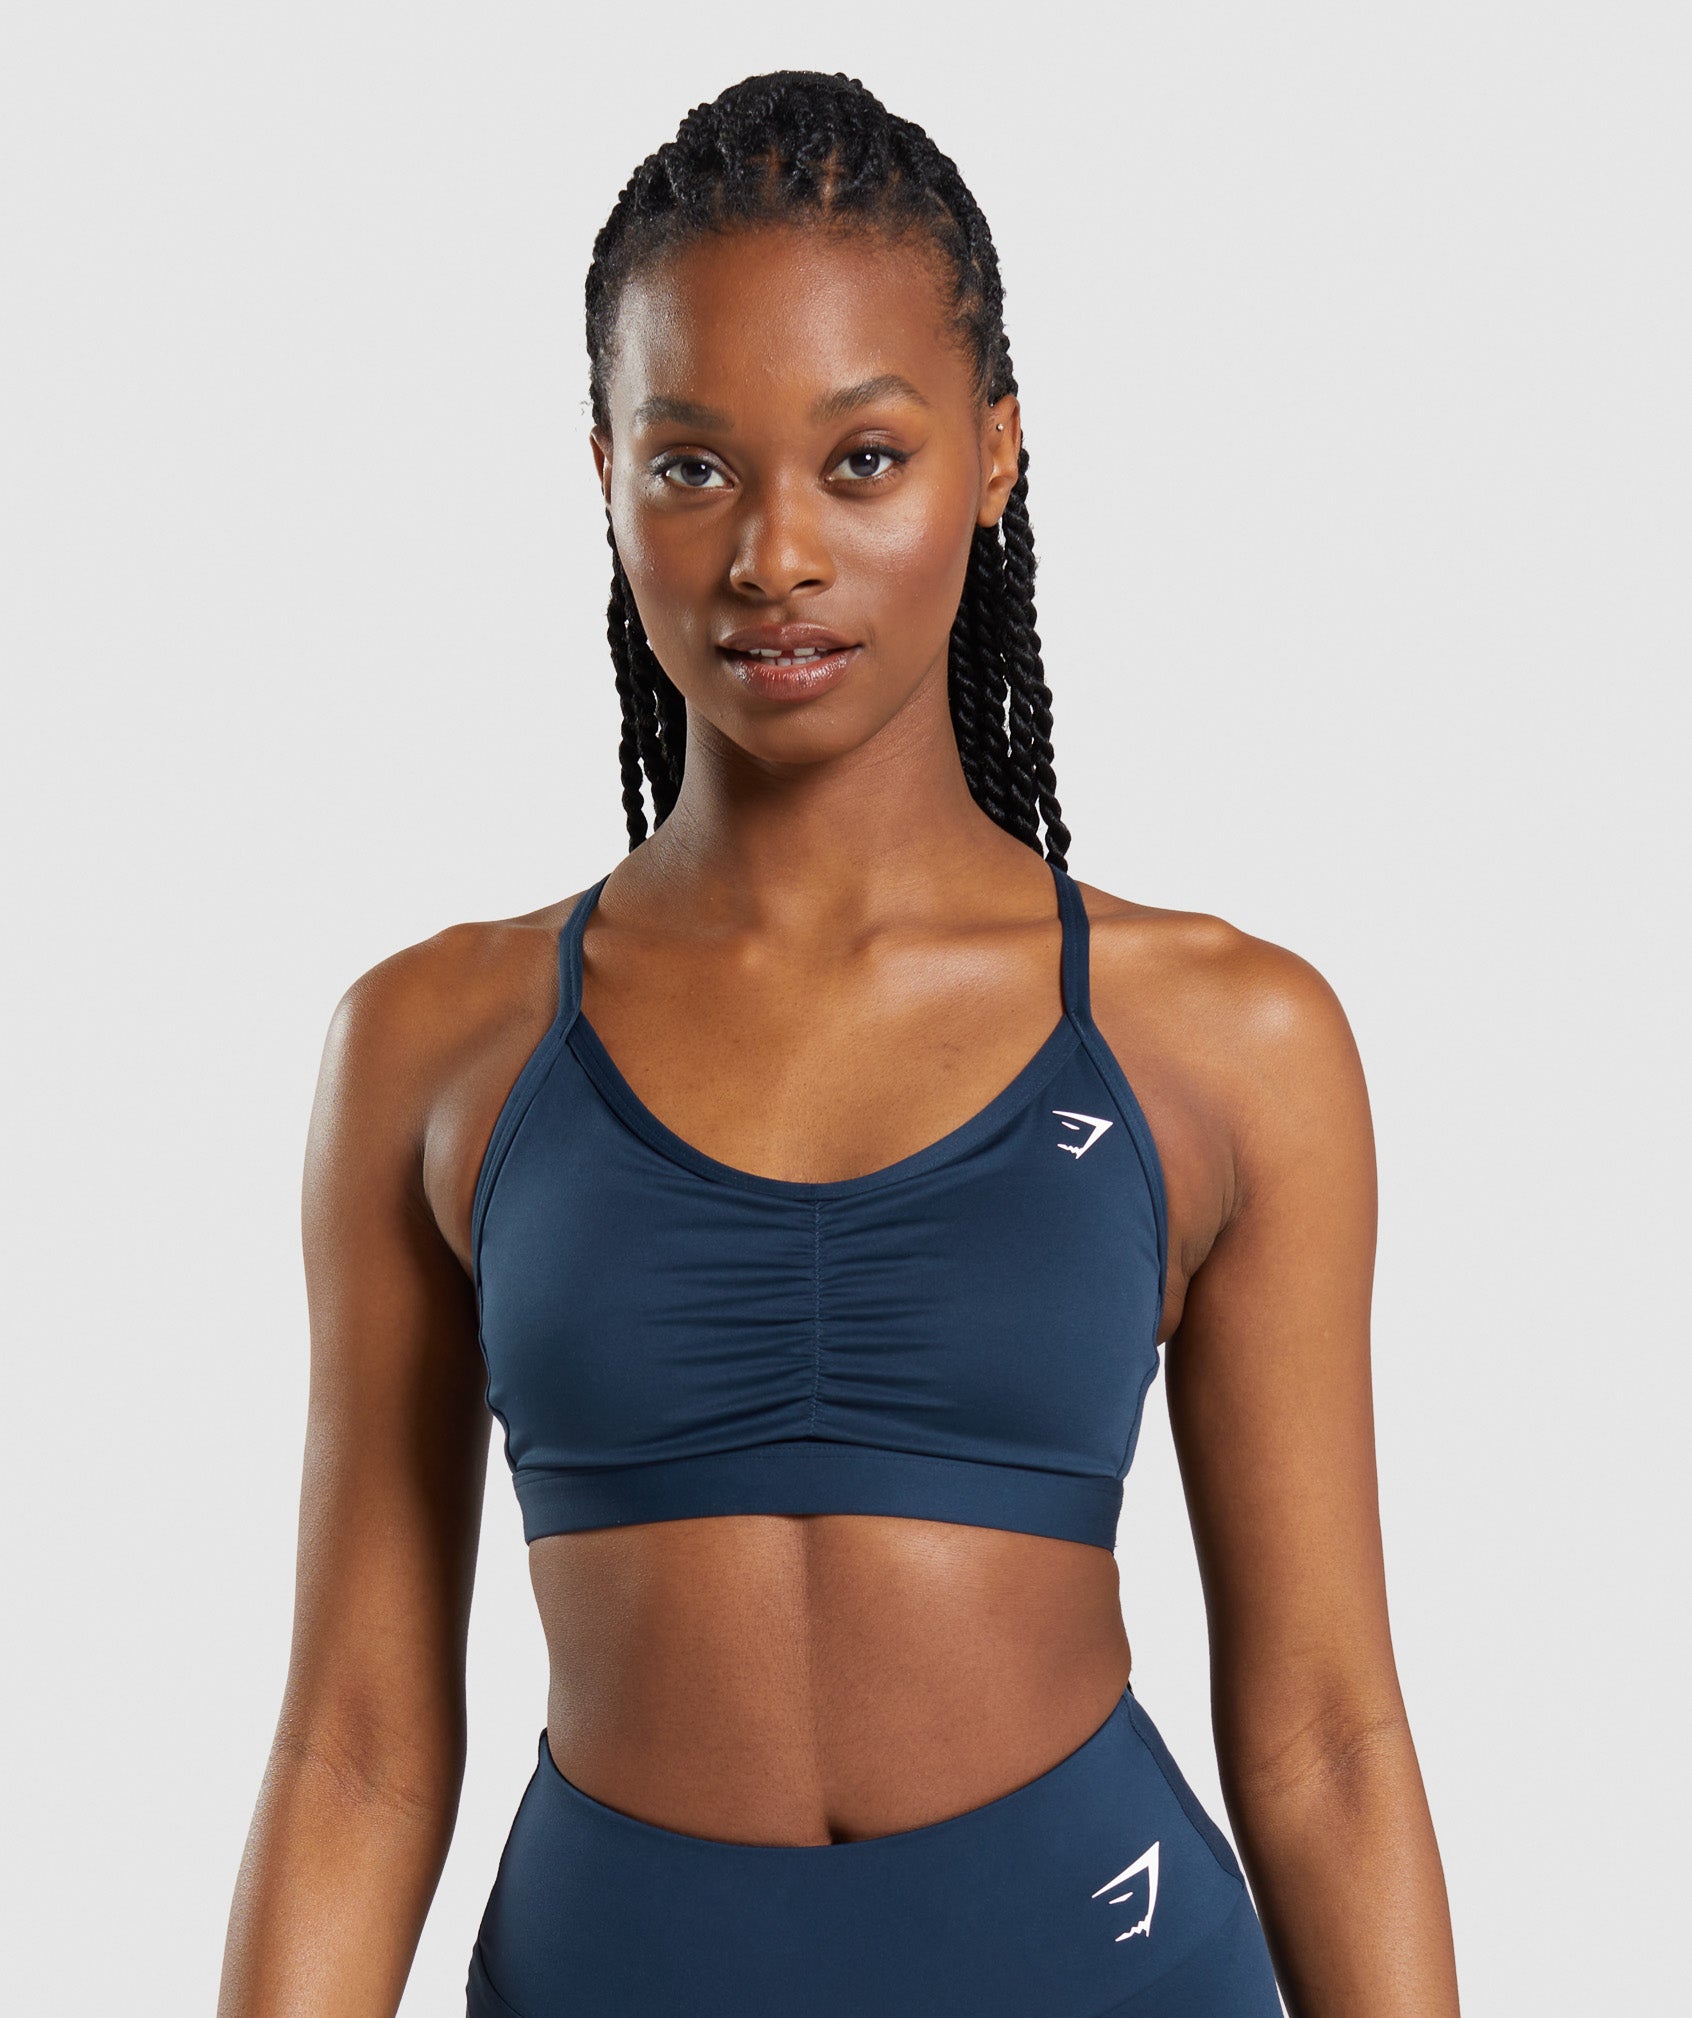 Woman S Chest in Her Sports Bra Stock Photo - Image of girl